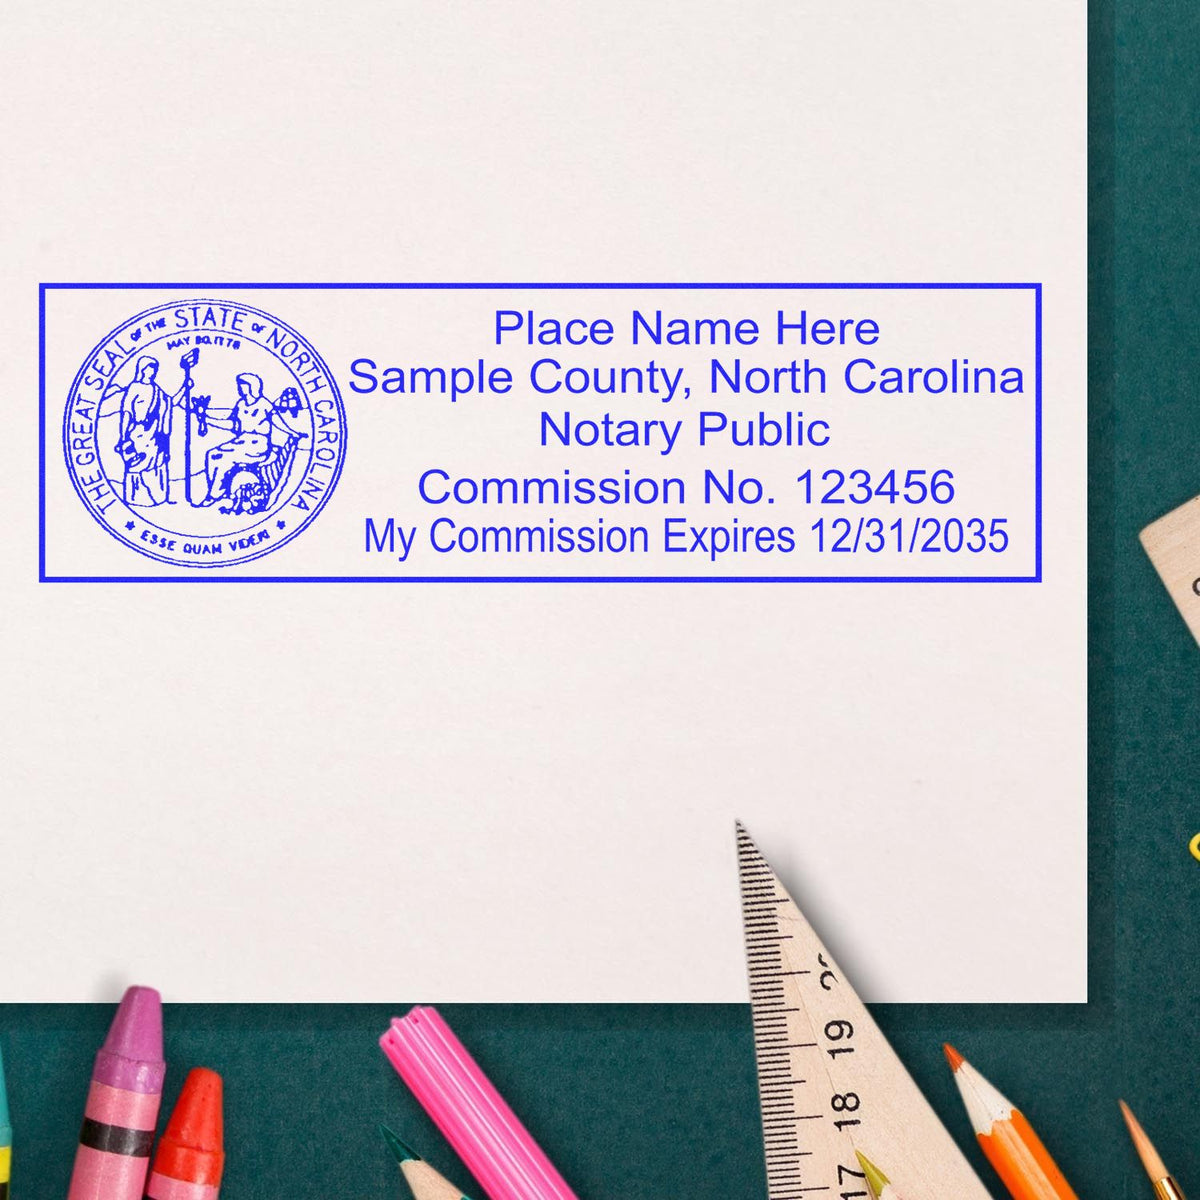 Slim Pre-Inked State Seal Notary Stamp for North Carolina in use photo showing a stamped imprint of the Slim Pre-Inked State Seal Notary Stamp for North Carolina